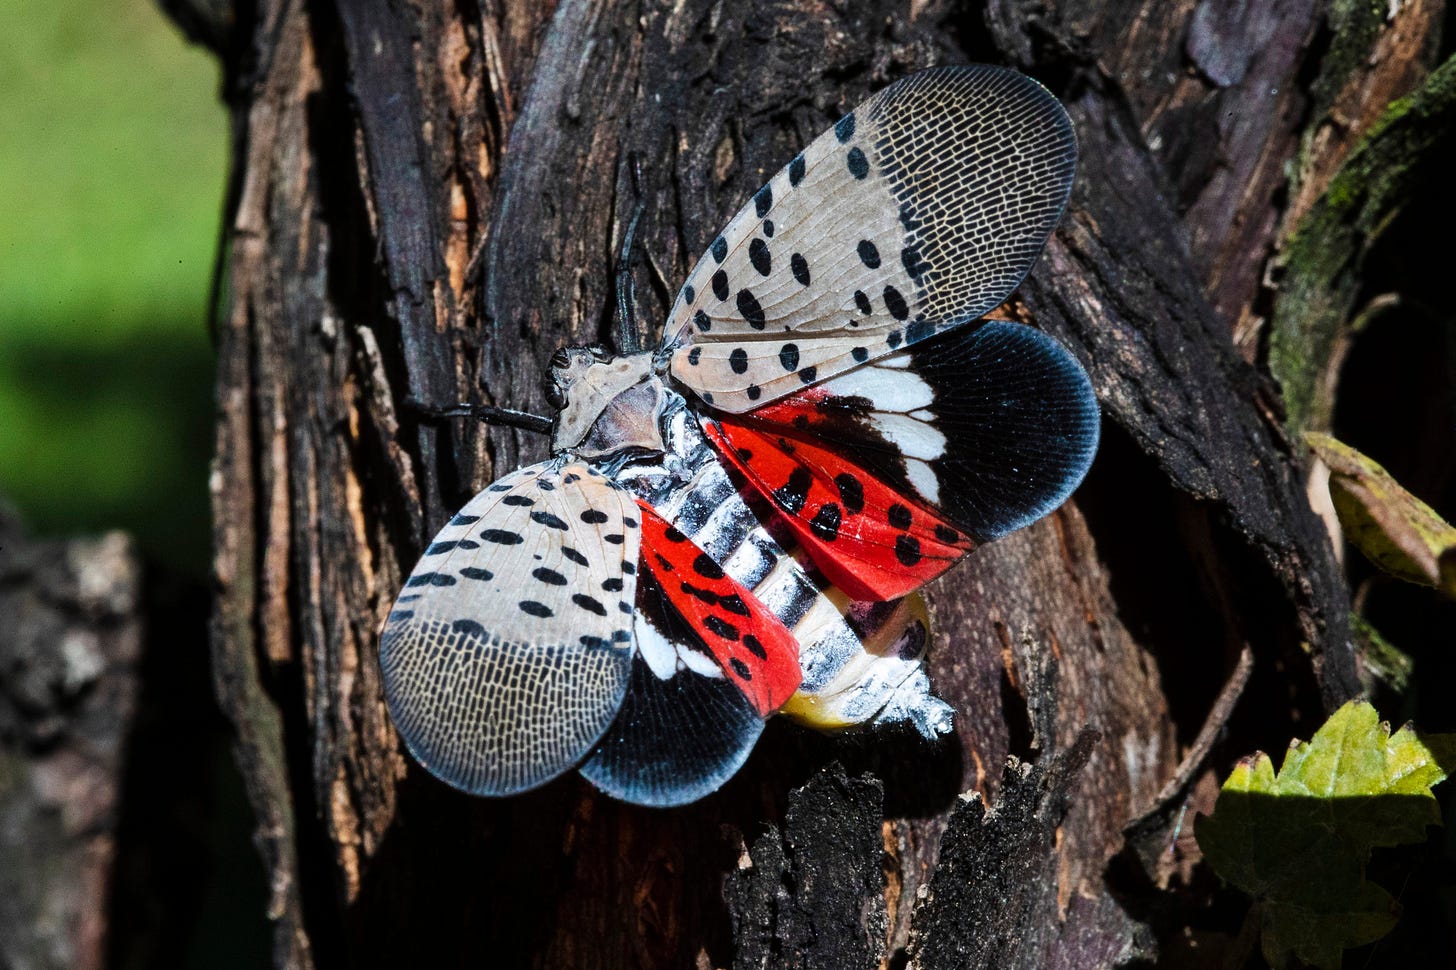 See a spotted lanternfly in PA, NY and OH? Kill it on sight.